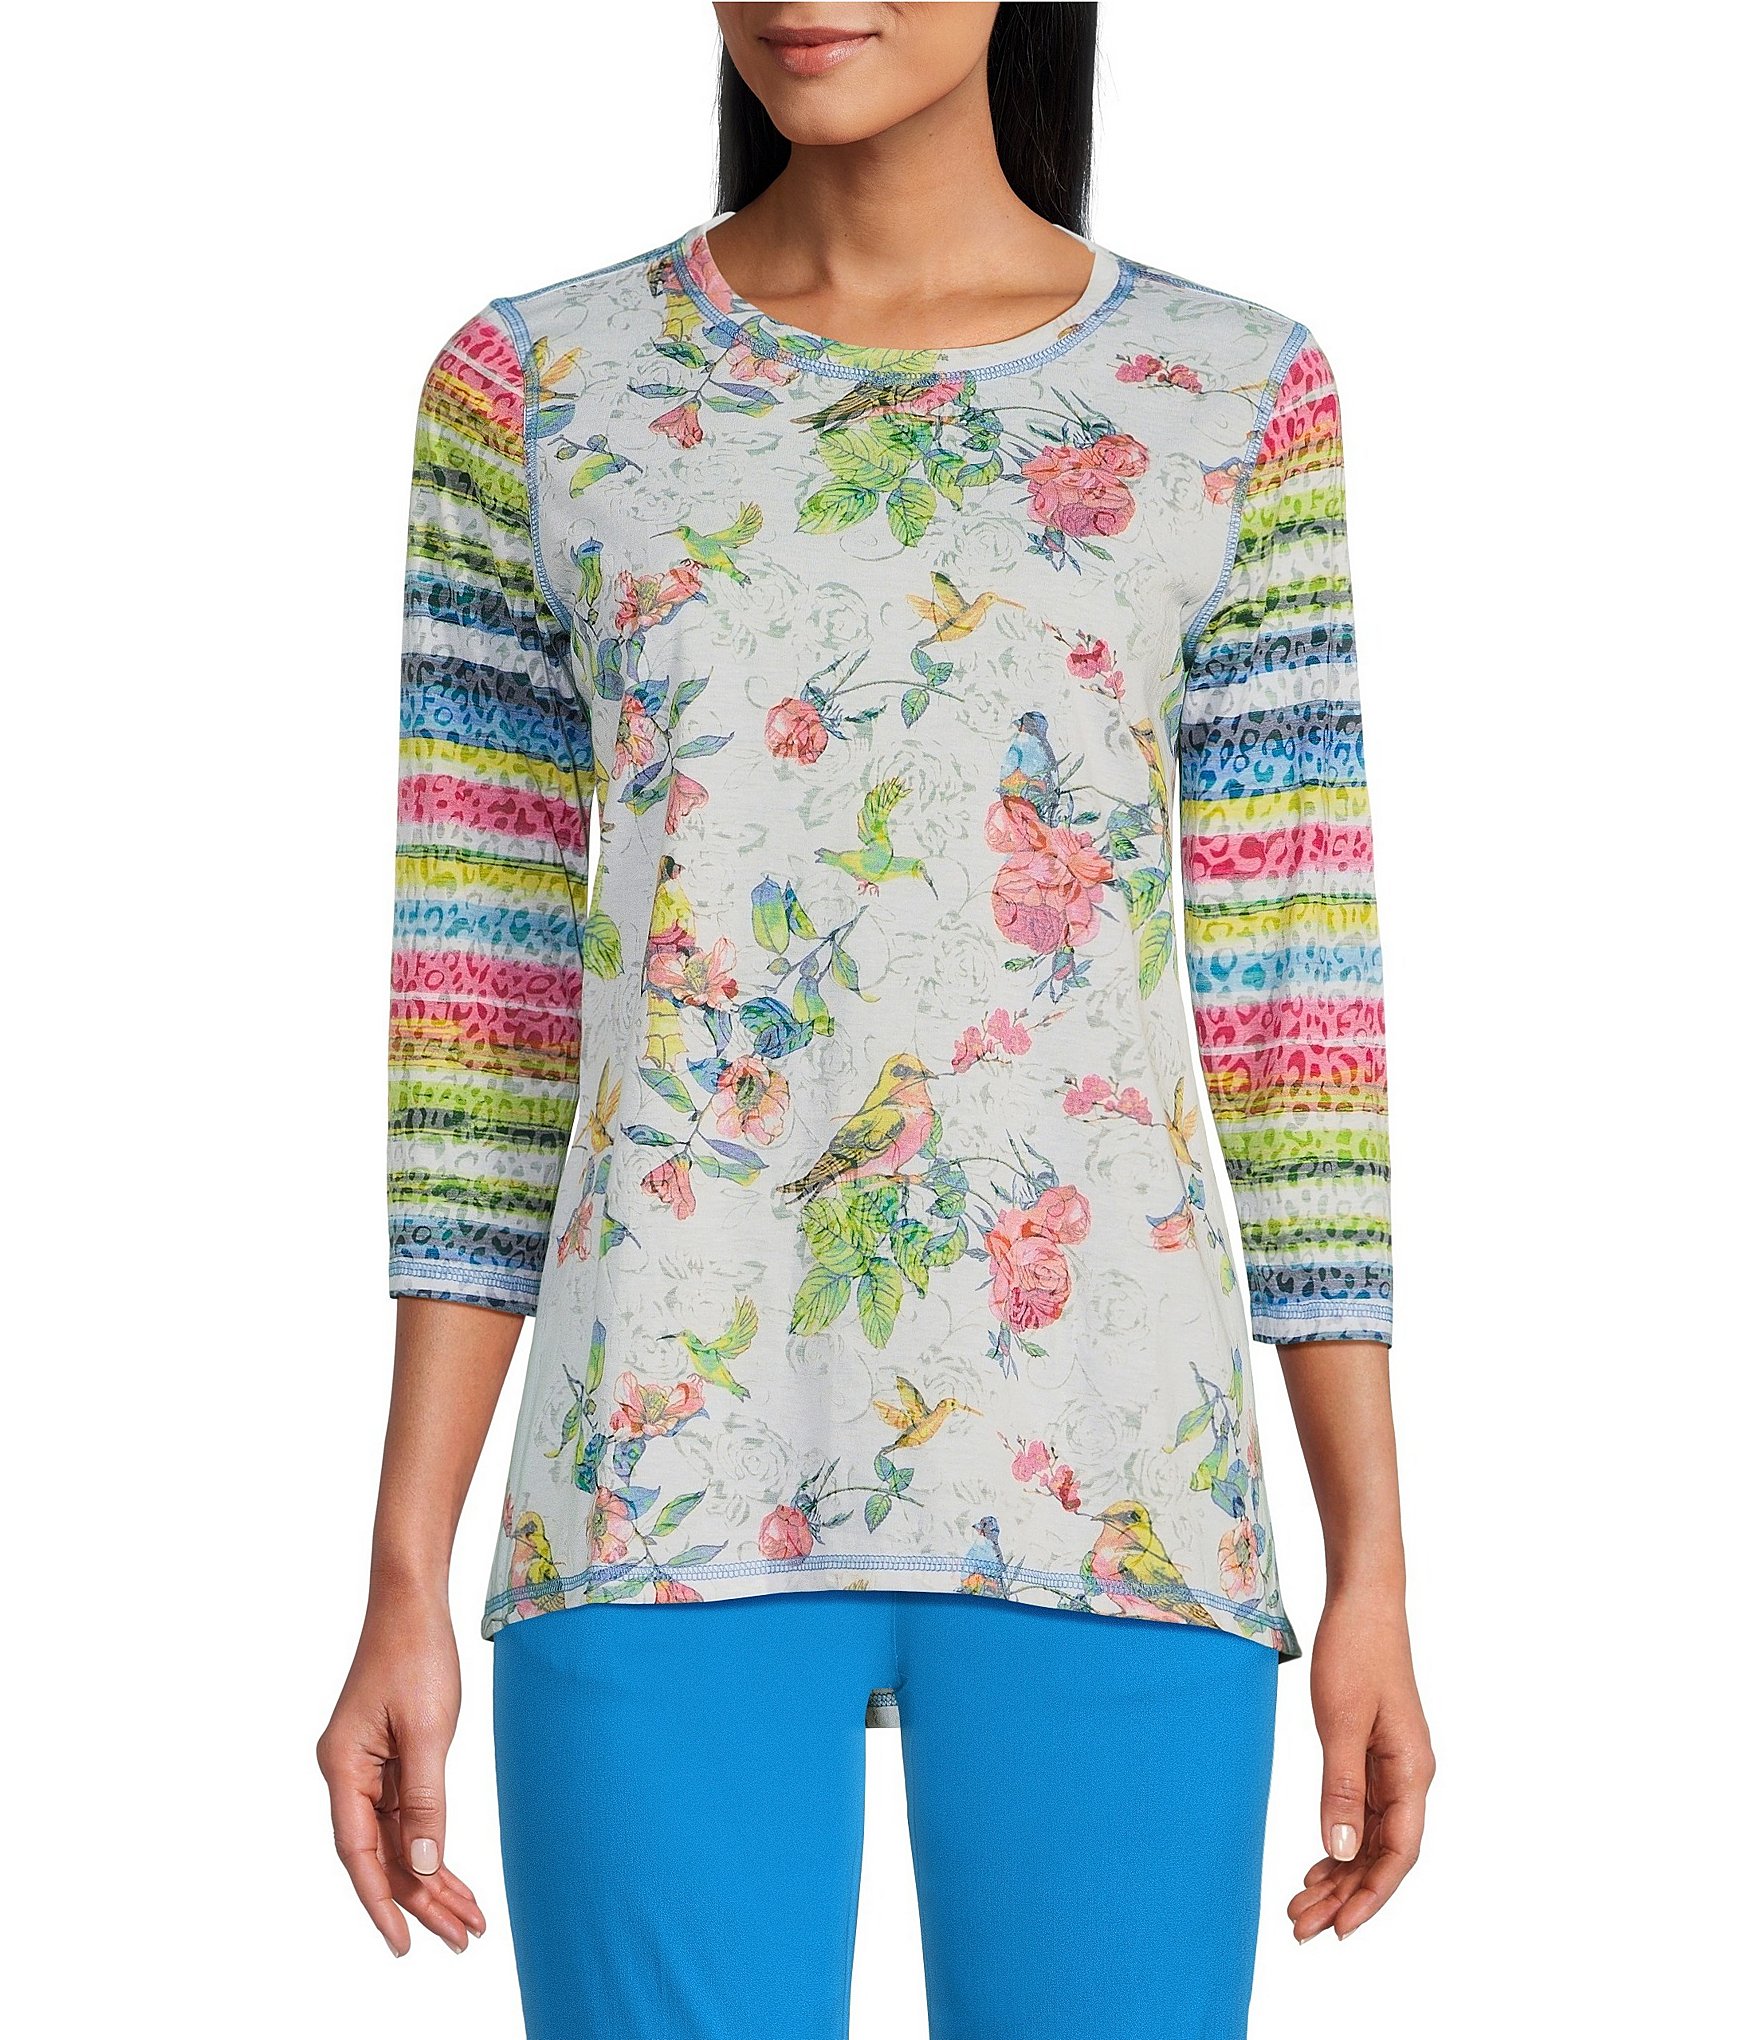 Multiples Floral Bird and Striped Print Scoop Neck 3/4 Sleeve Burnout ...